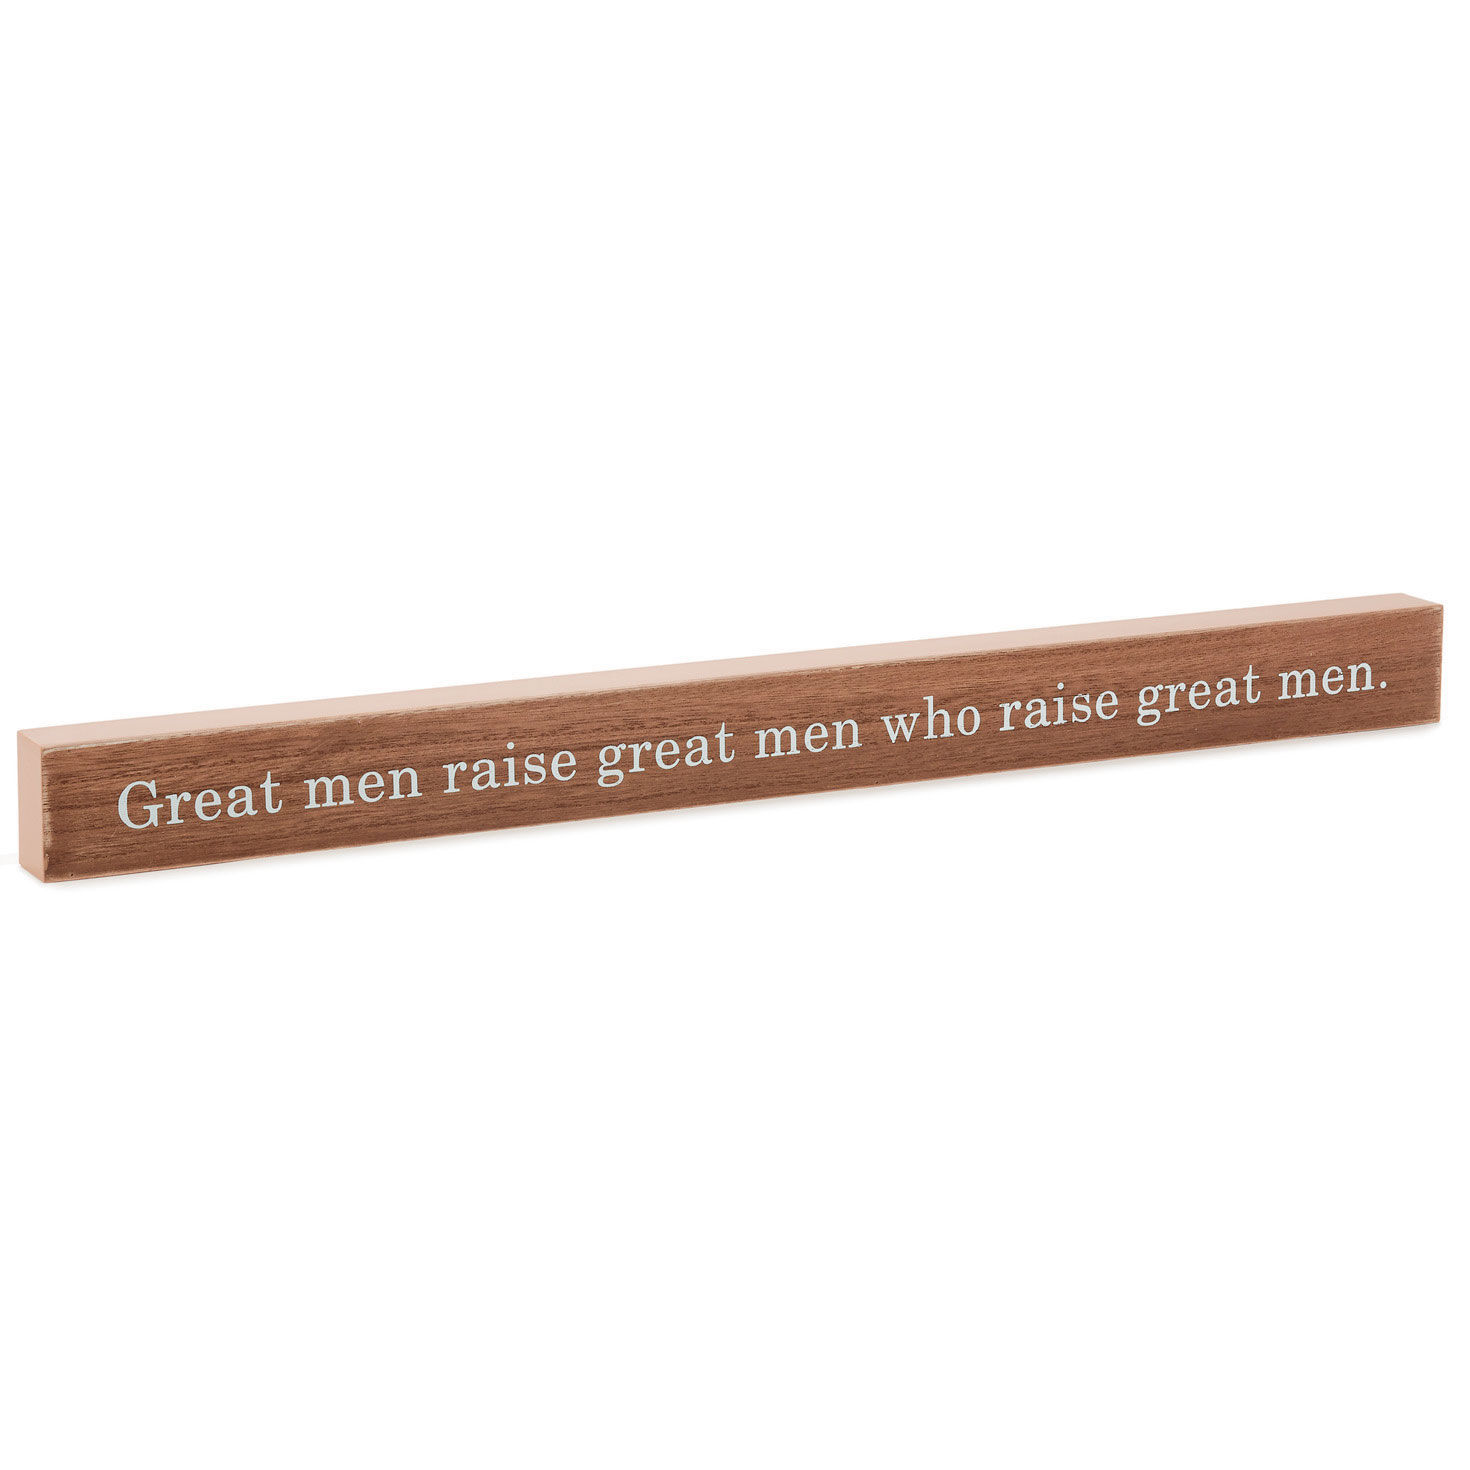 Great Men Raise Great Men Quote Sign, 23.5x2 for only USD 14.99 | Hallmark